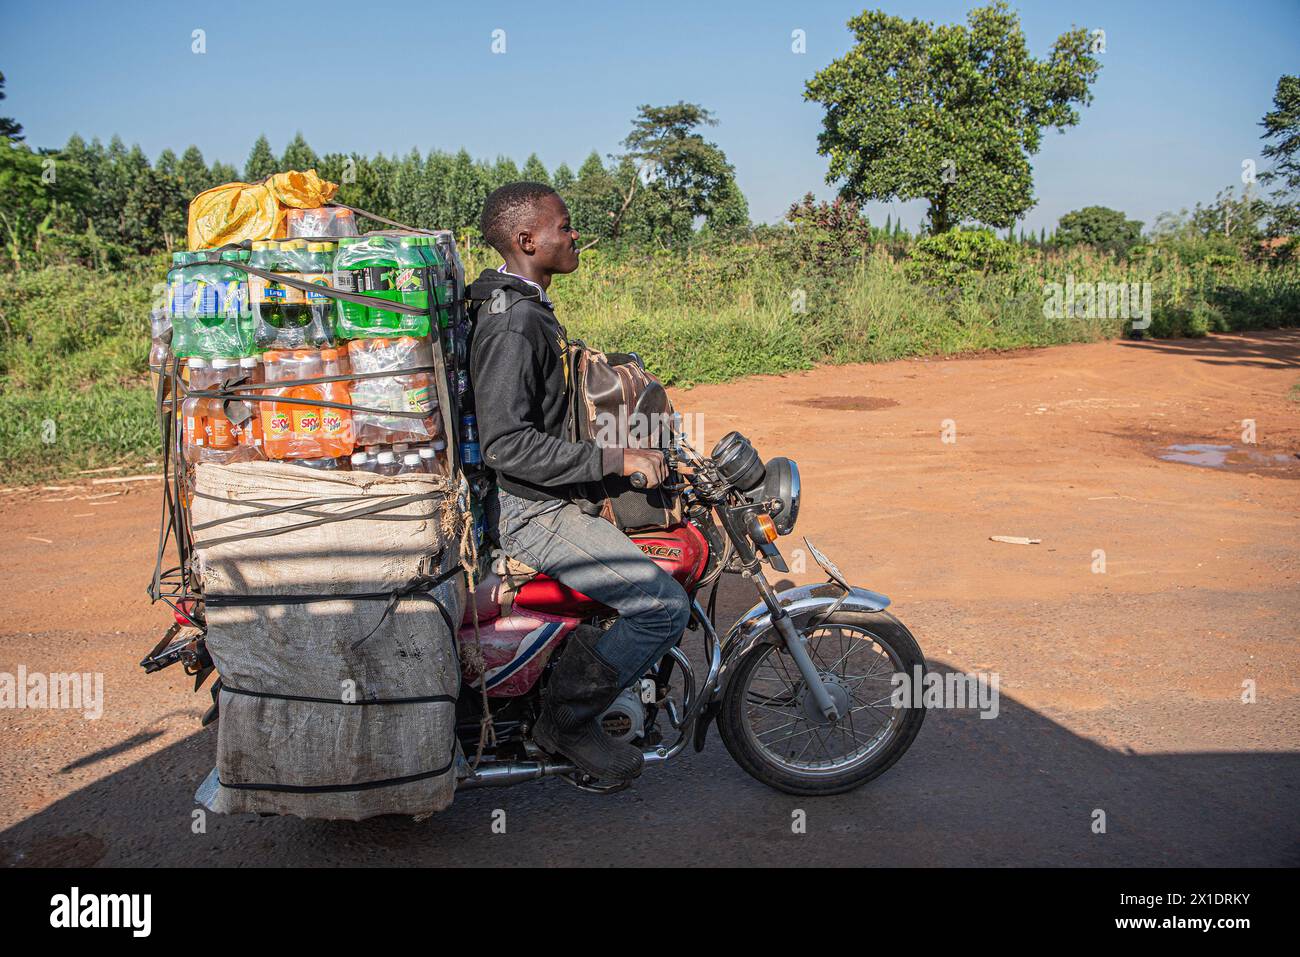 A young Ugandan man rides his motorcycle along a dusty, unpaved road, carrying a heavy load of assorted beverages under the warm, sunny sky Stock Photo